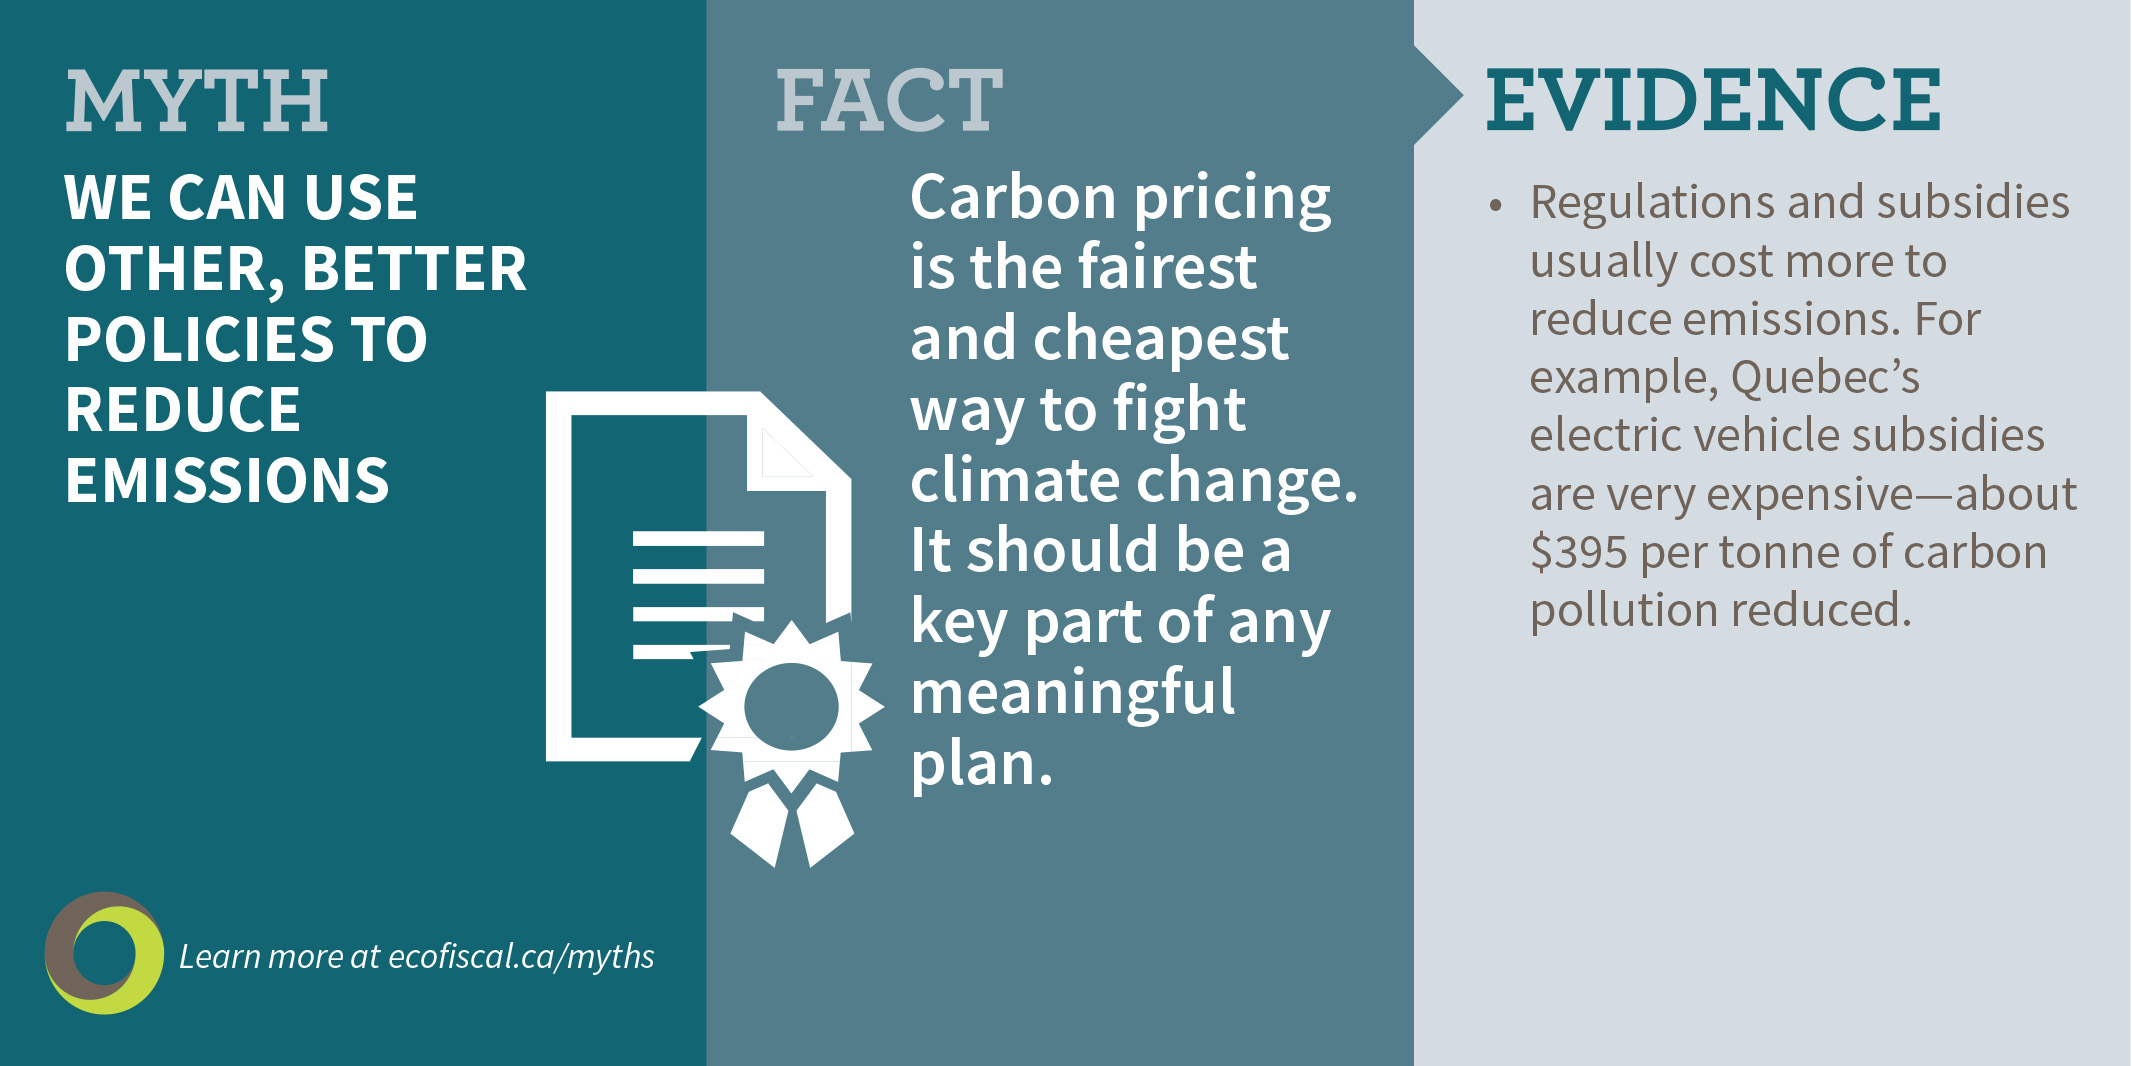 Myth #9: We can use other, better policies to shrink our emissions